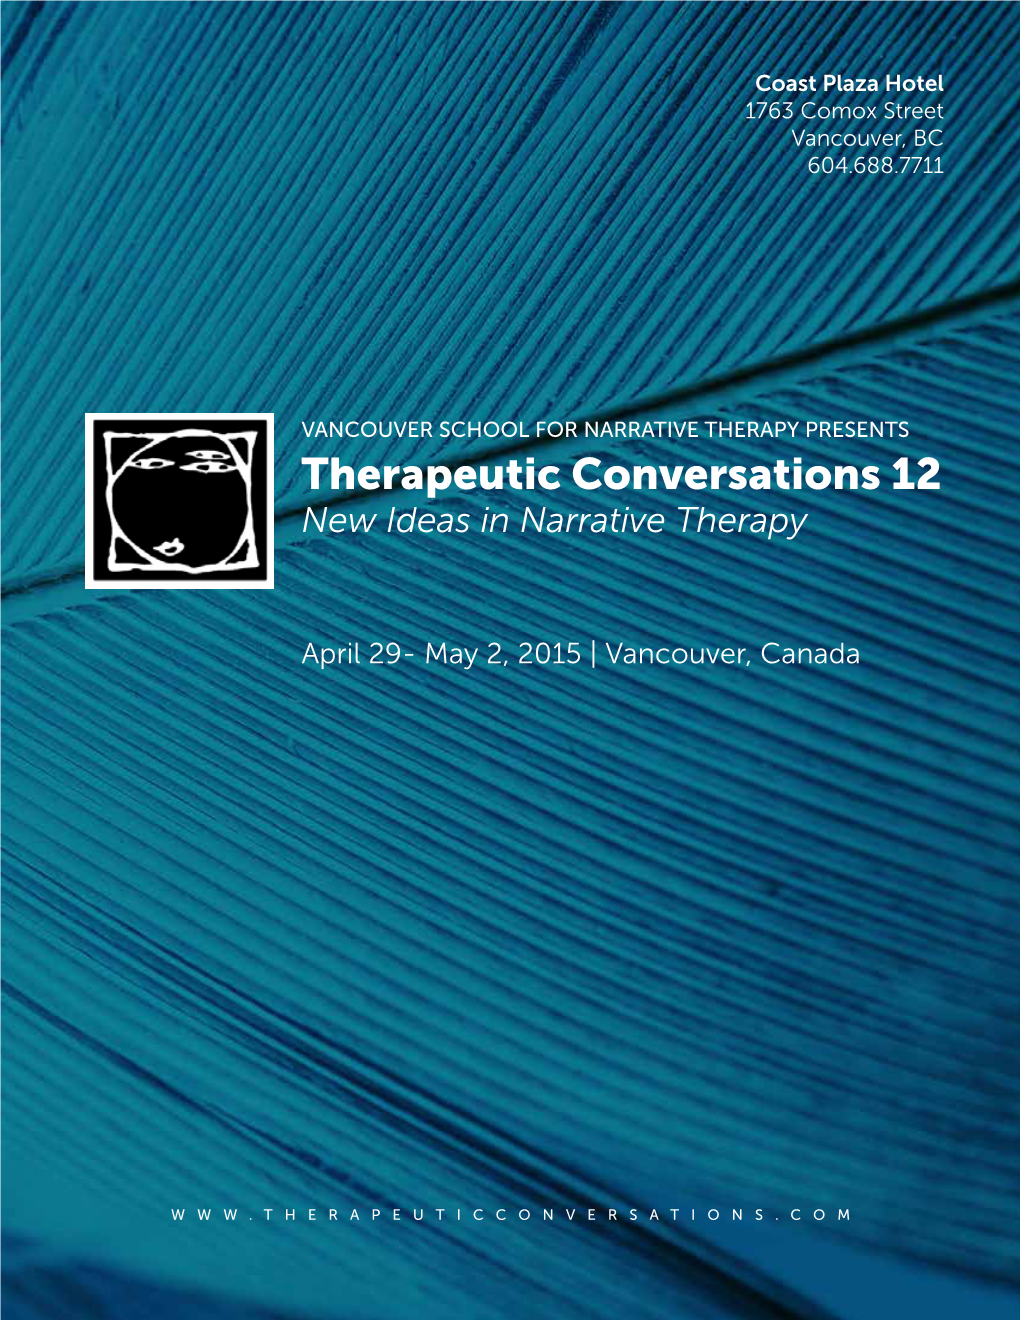 Therapeutic Conversations 12 New Ideas in Narrative Therapy